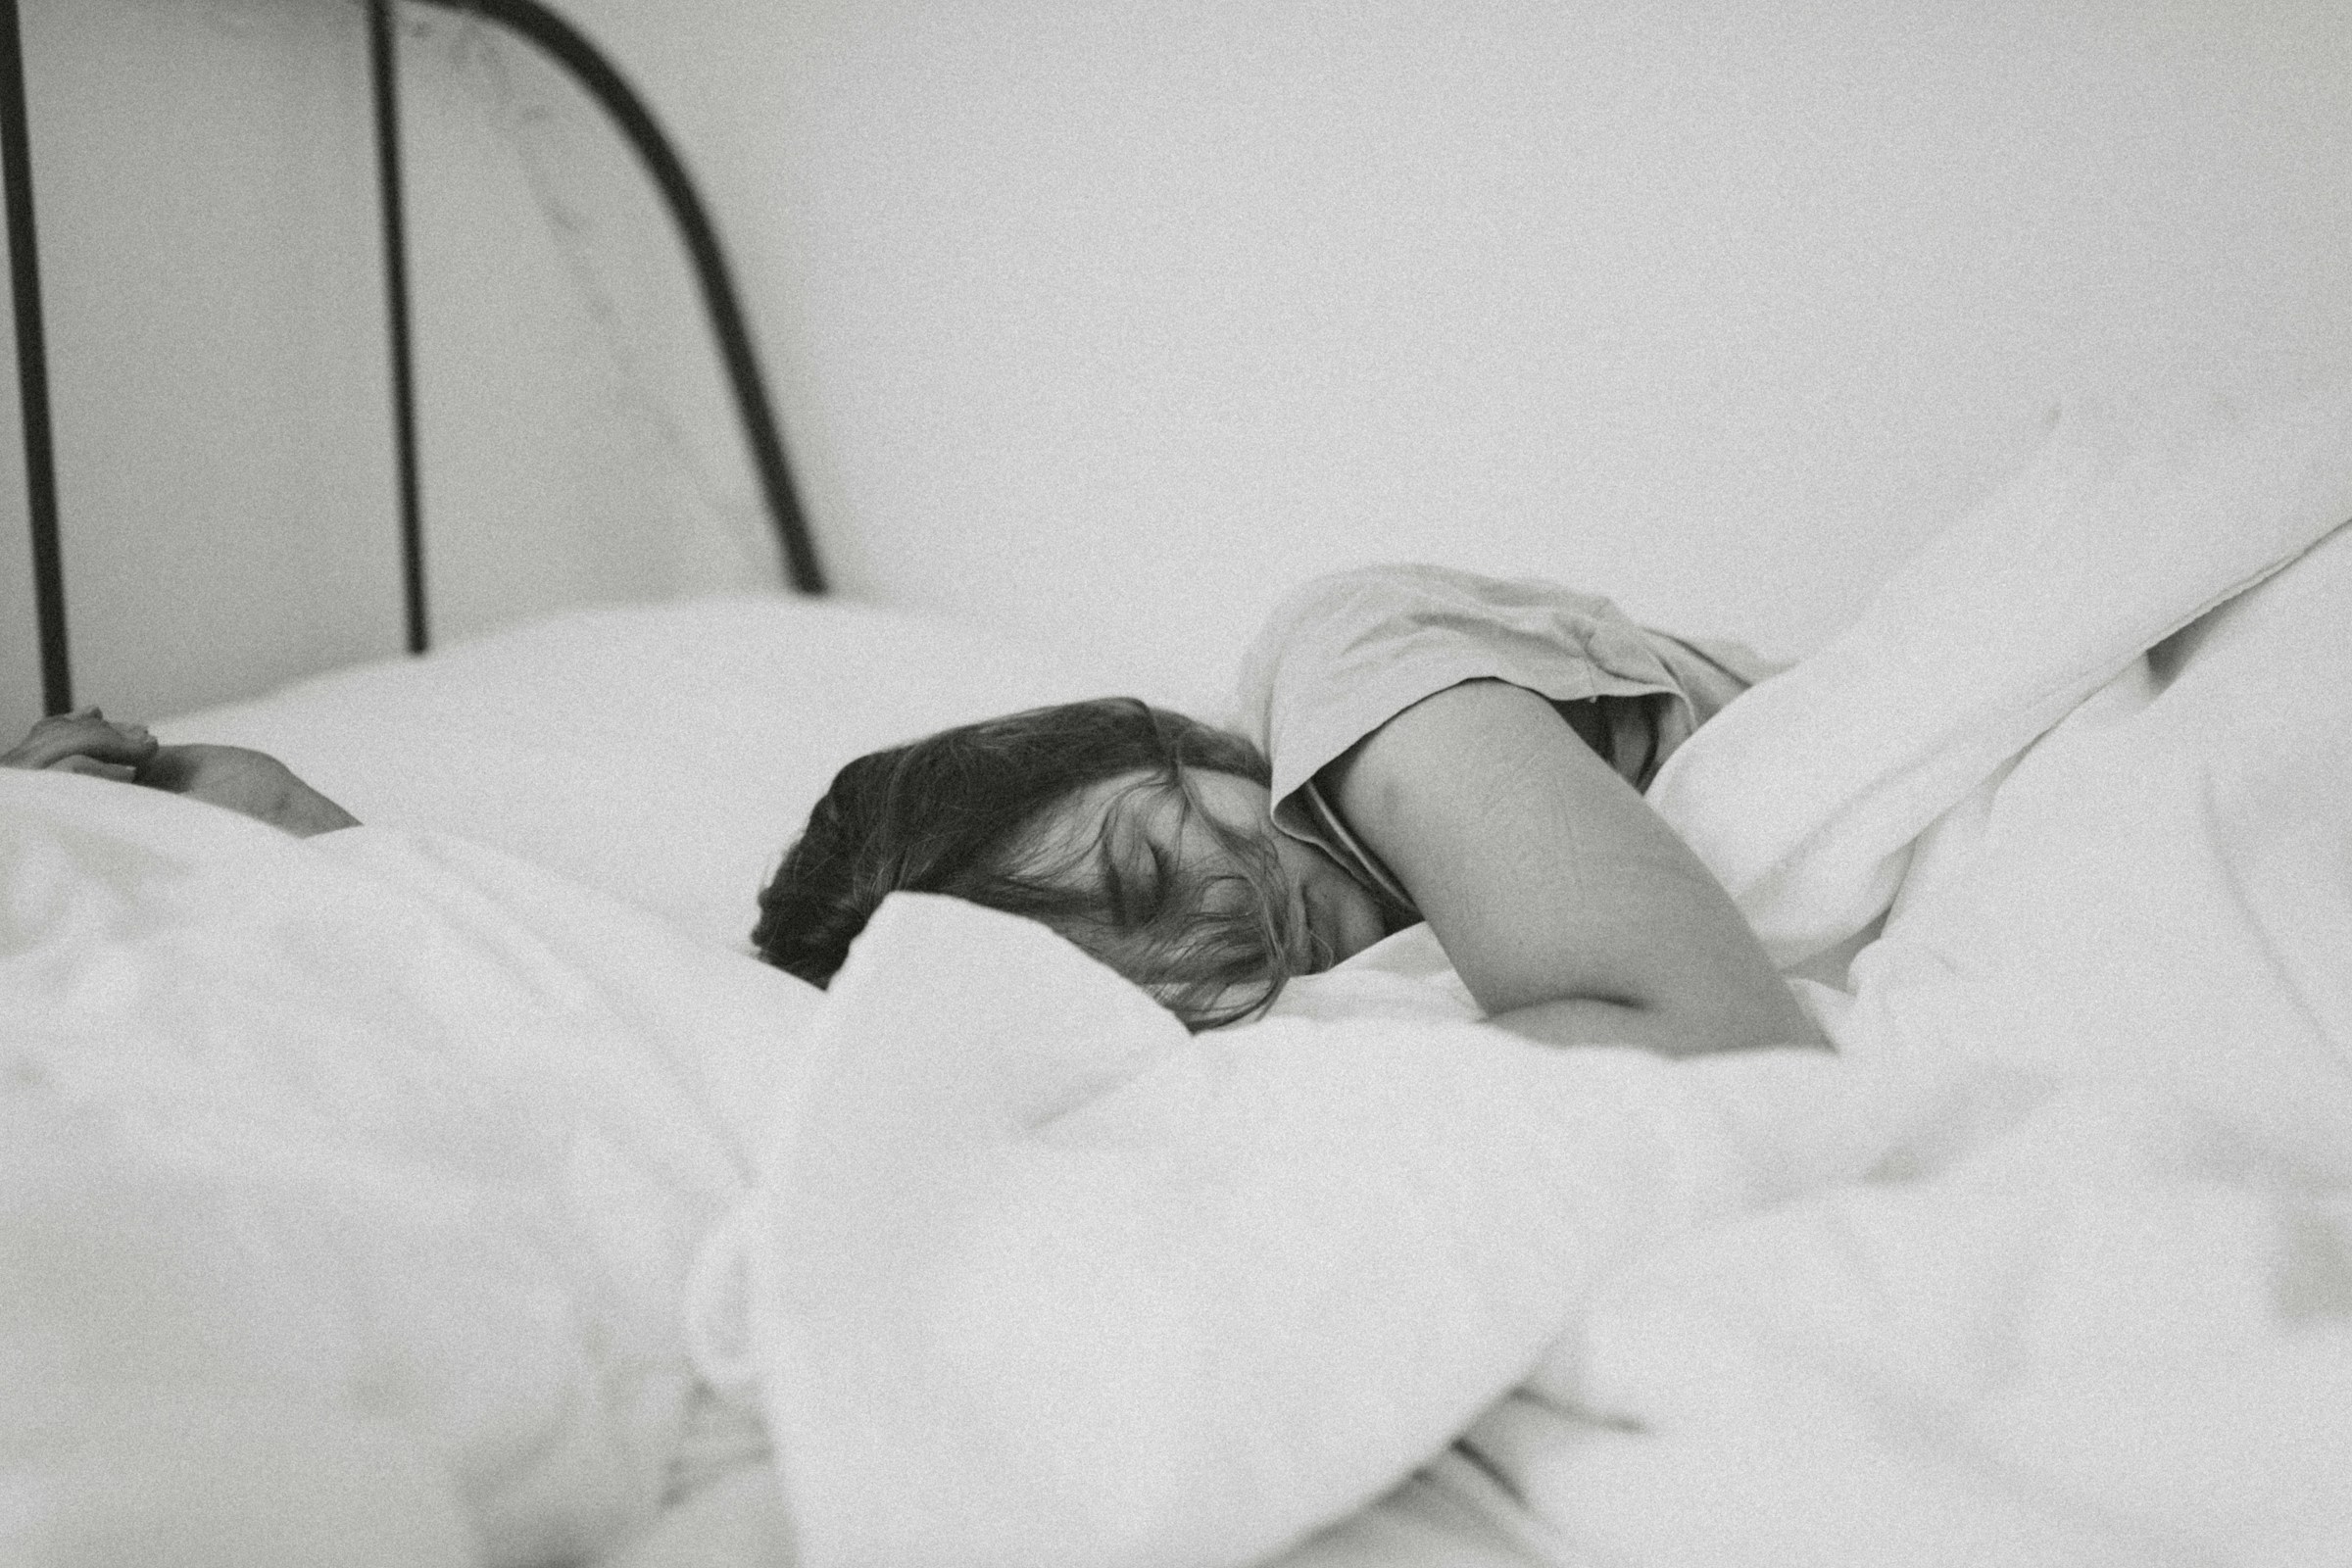 A woman sleeping in her bed | Source: Unsplash